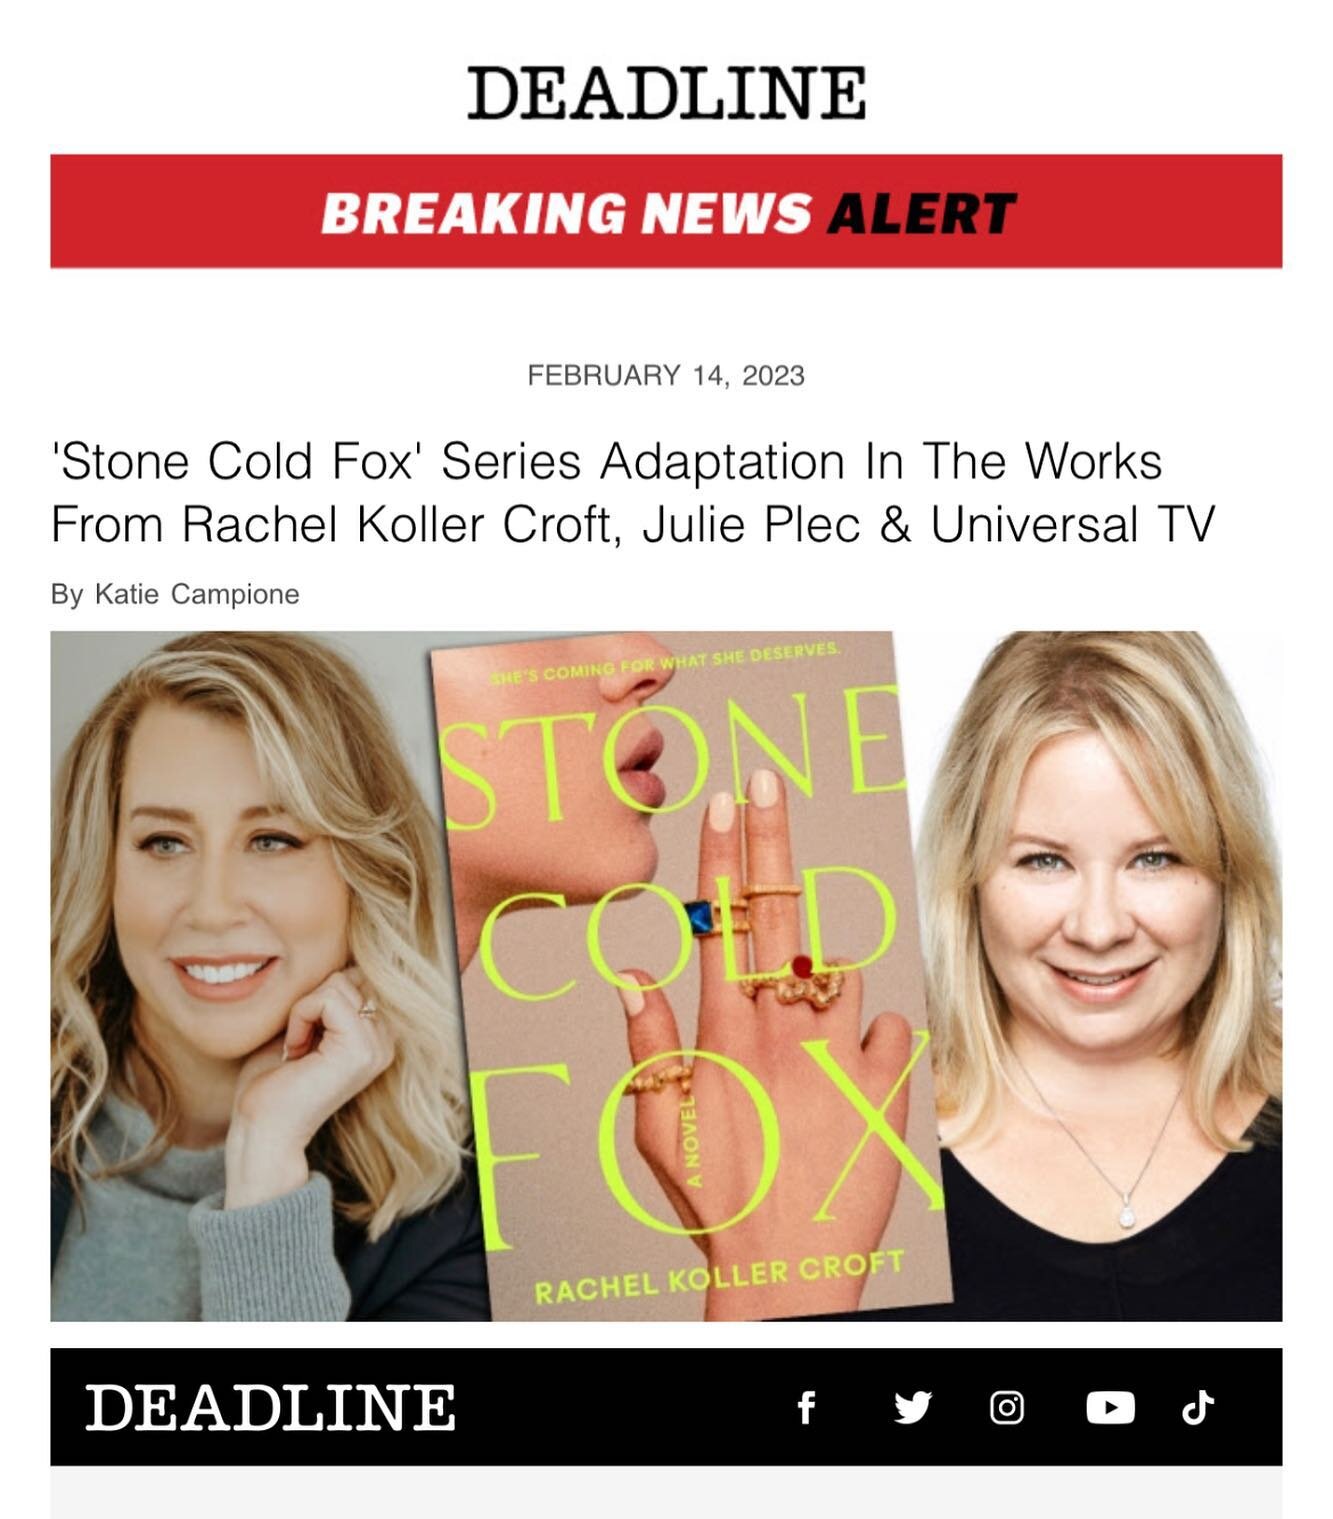 A very exciting @deadline blast for us today! We love this book and can&rsquo;t wait to adapt it with @rachkollercroft &amp; @universaltv. 

#StoneColdFox #JuliePlec #RachelKollerCroft